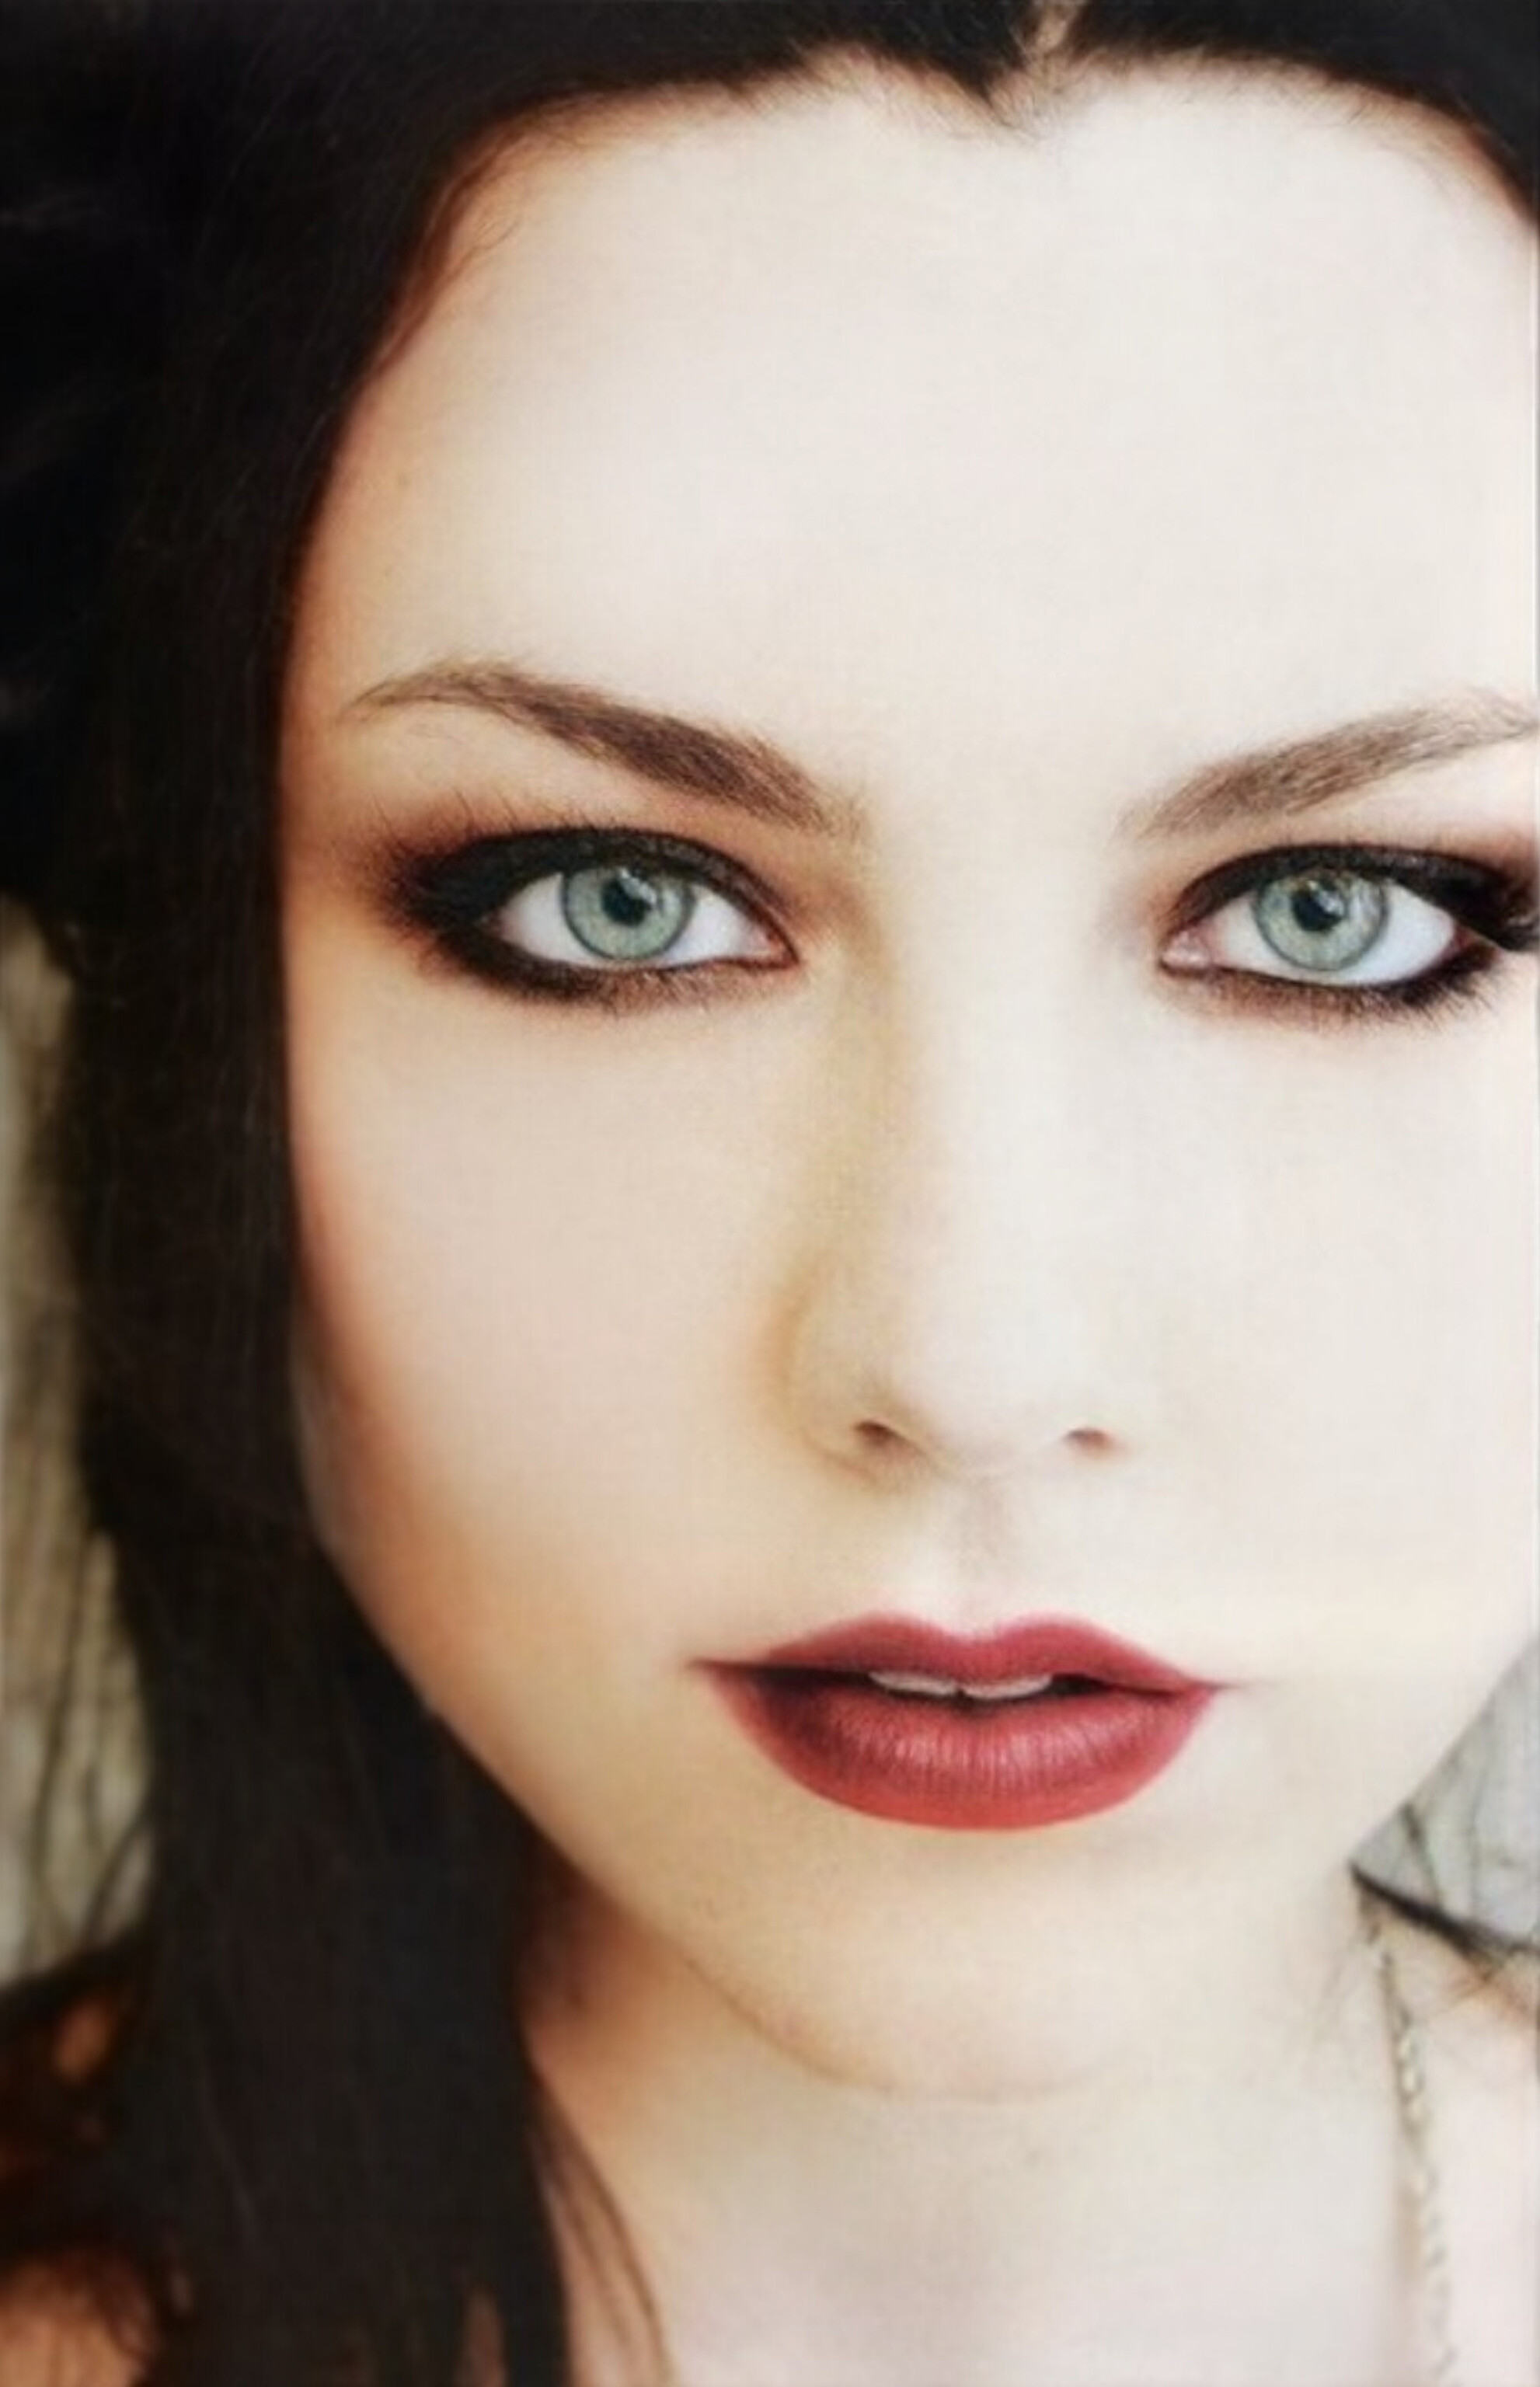 1982x3072
Keywords: amy lee;hq;photoshoot;the open door;2006;sesion